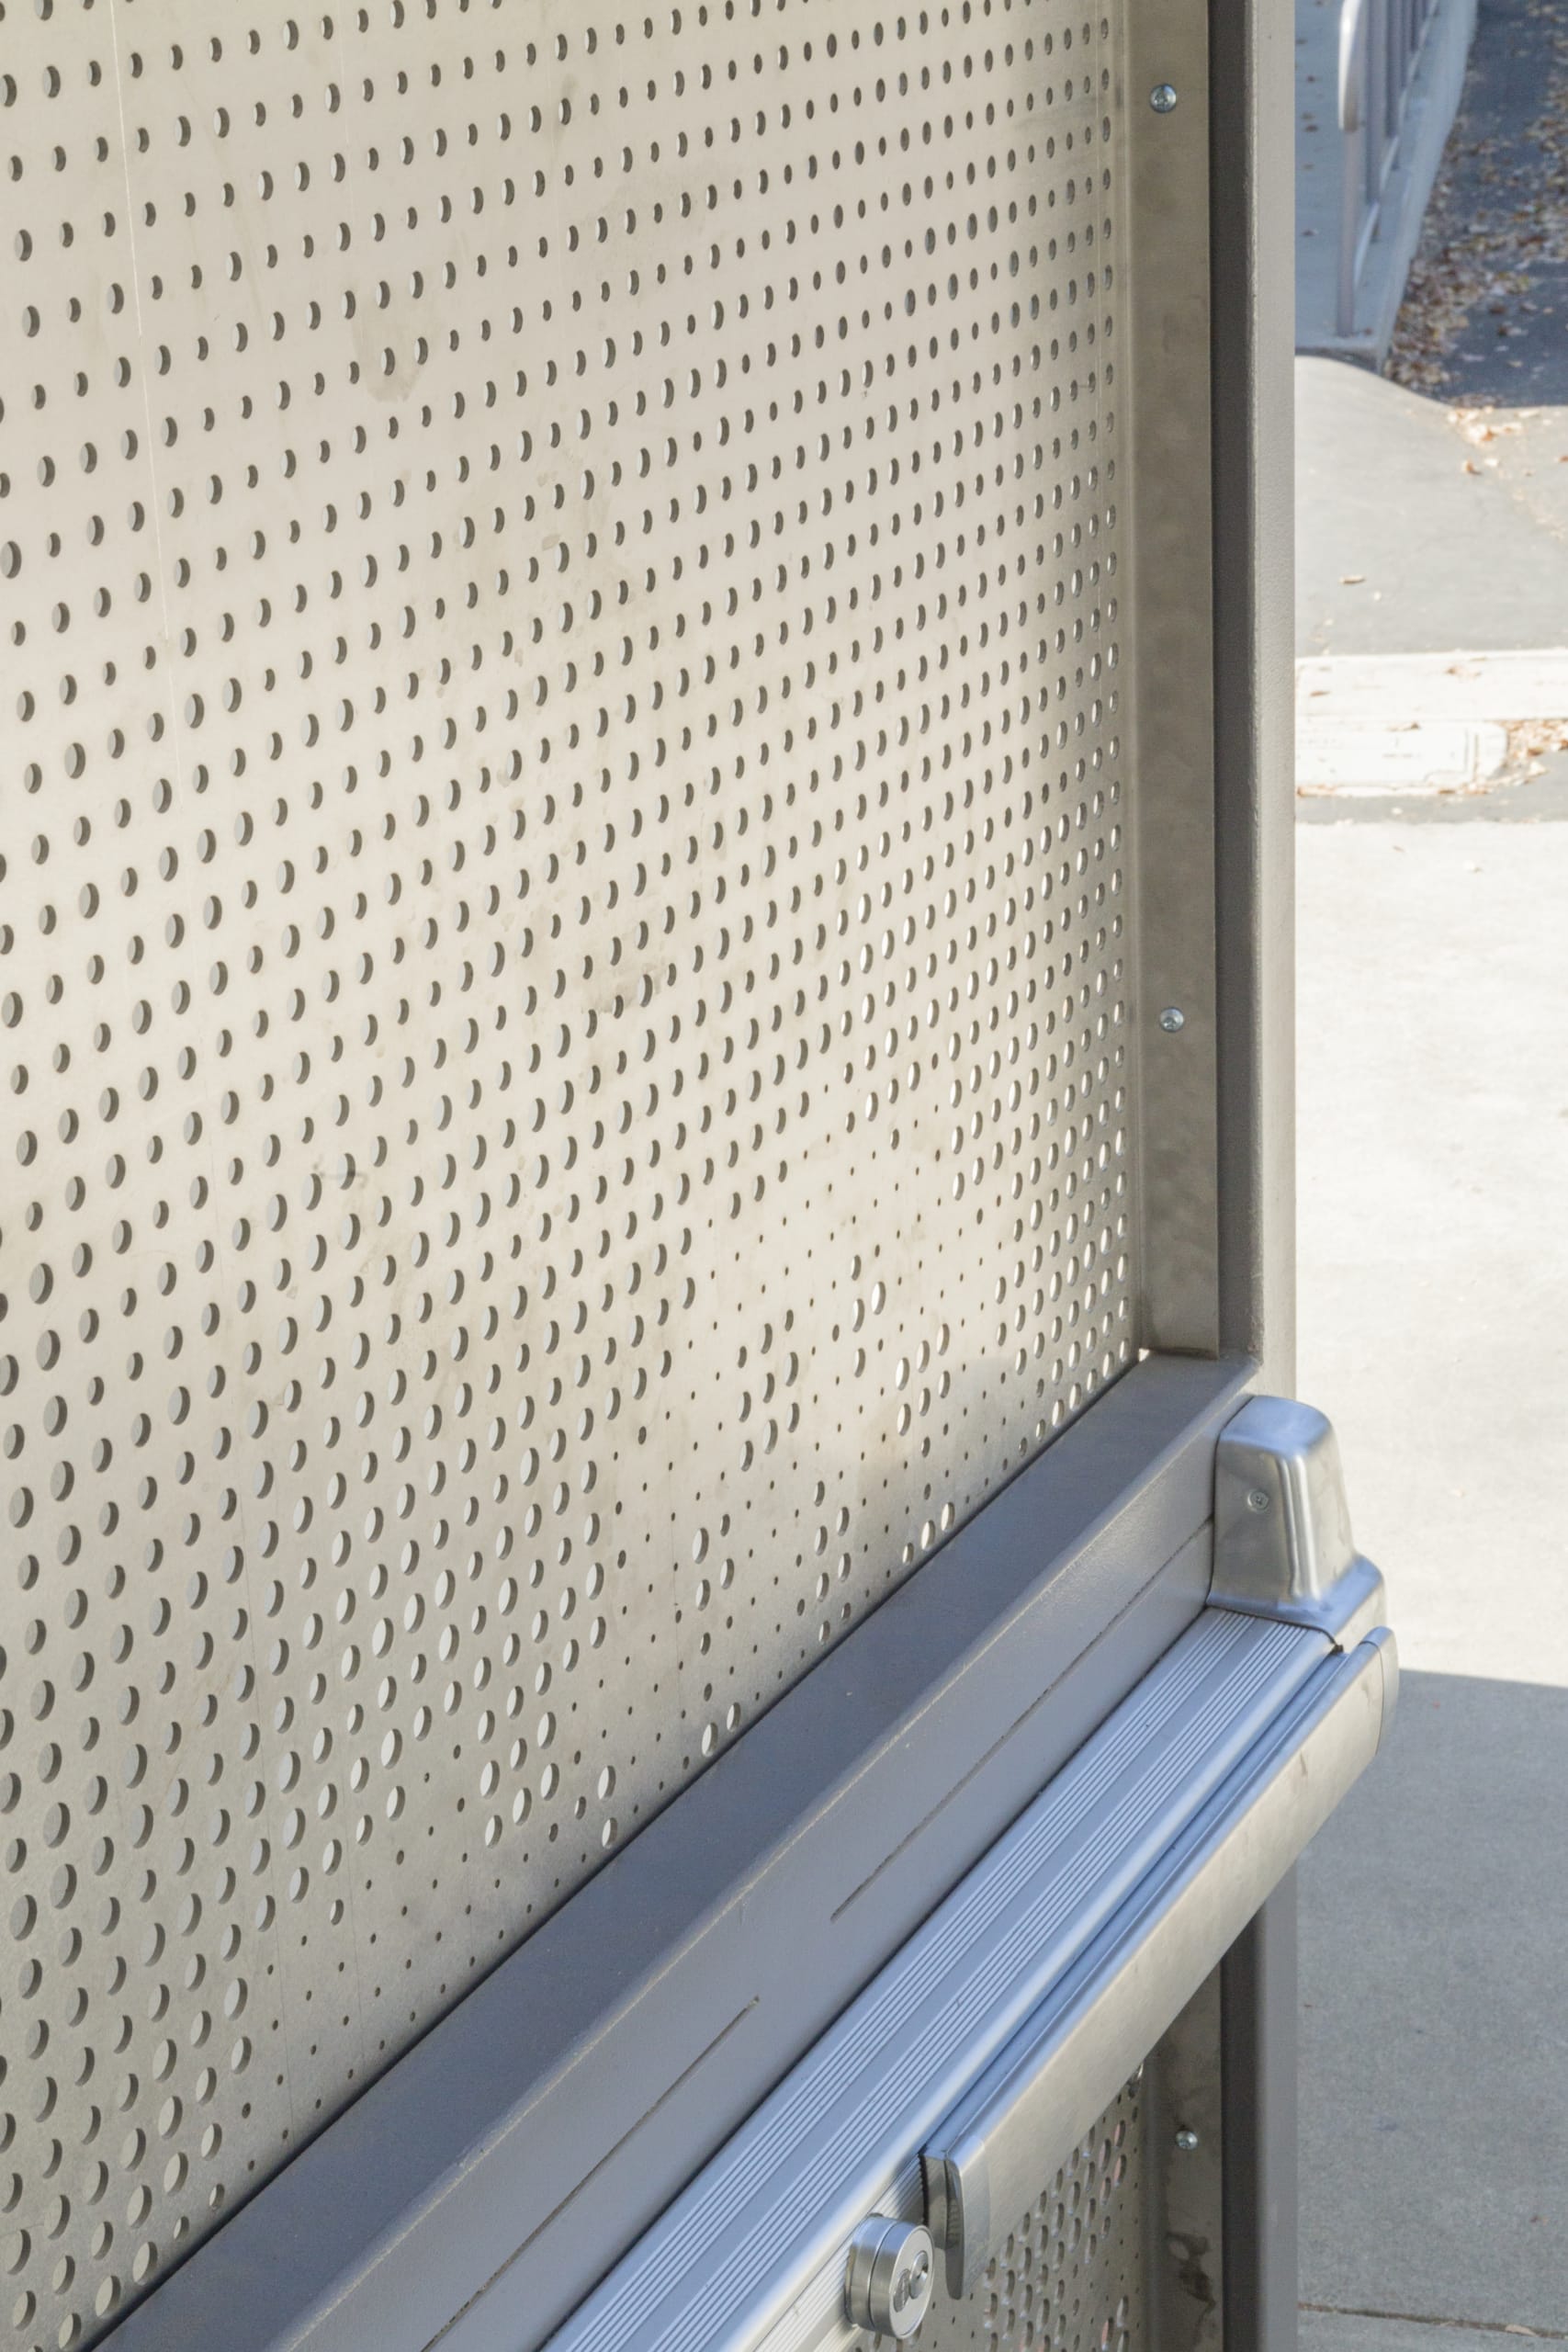 Detail of the perforated stainless steel door.